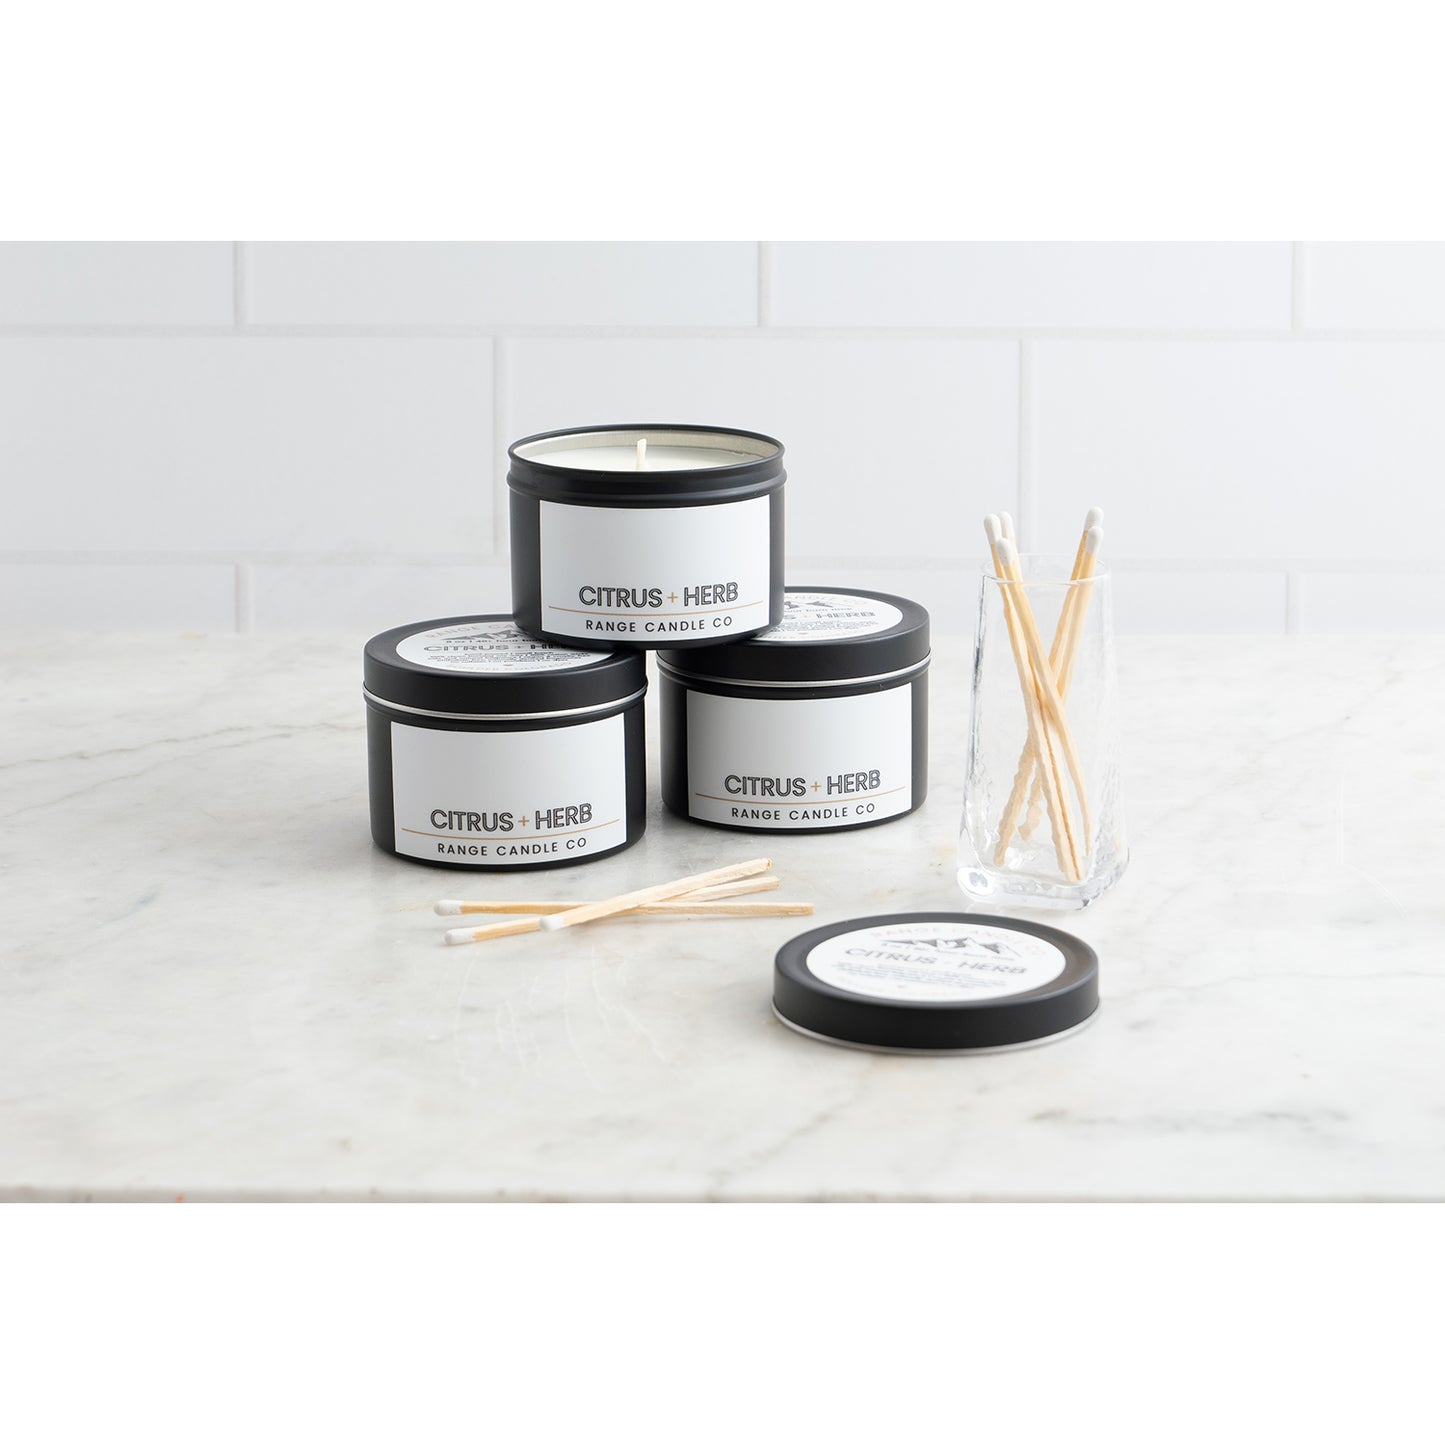 Citrus + Herb Soy Candle